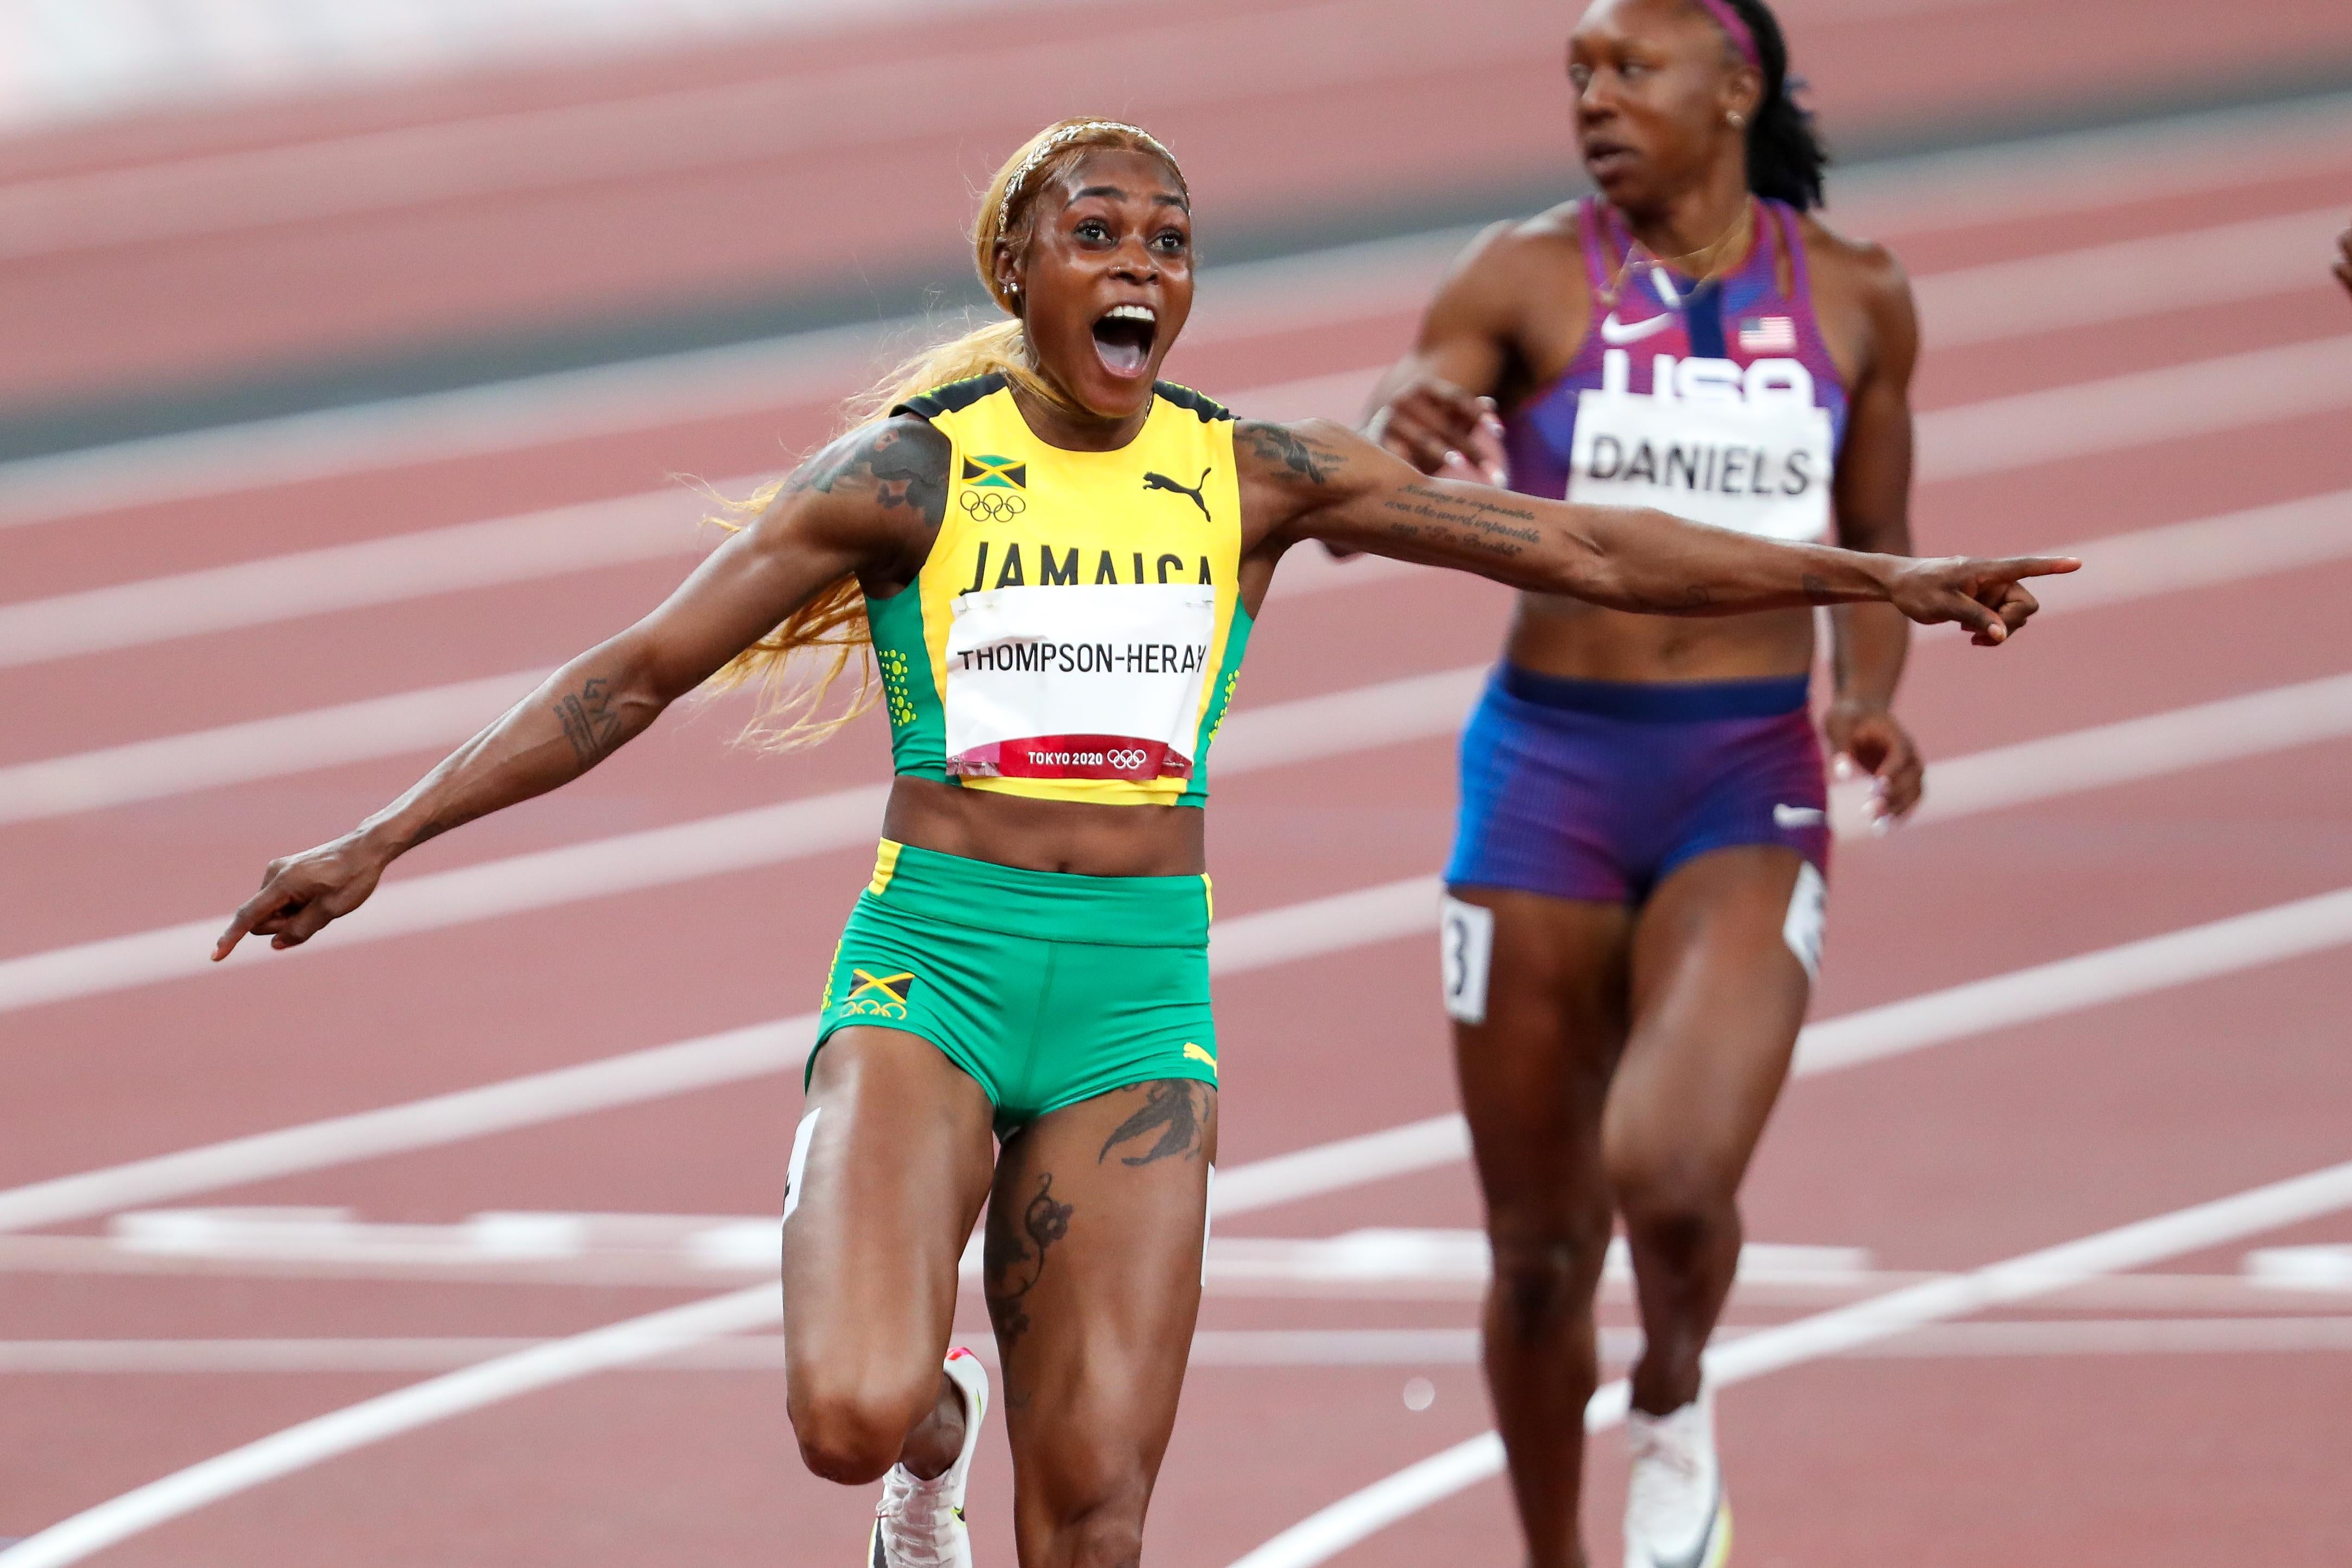 Thompson-Herah yells in celebration with her arms out to the side on the track, American Teahna Daniels in the background